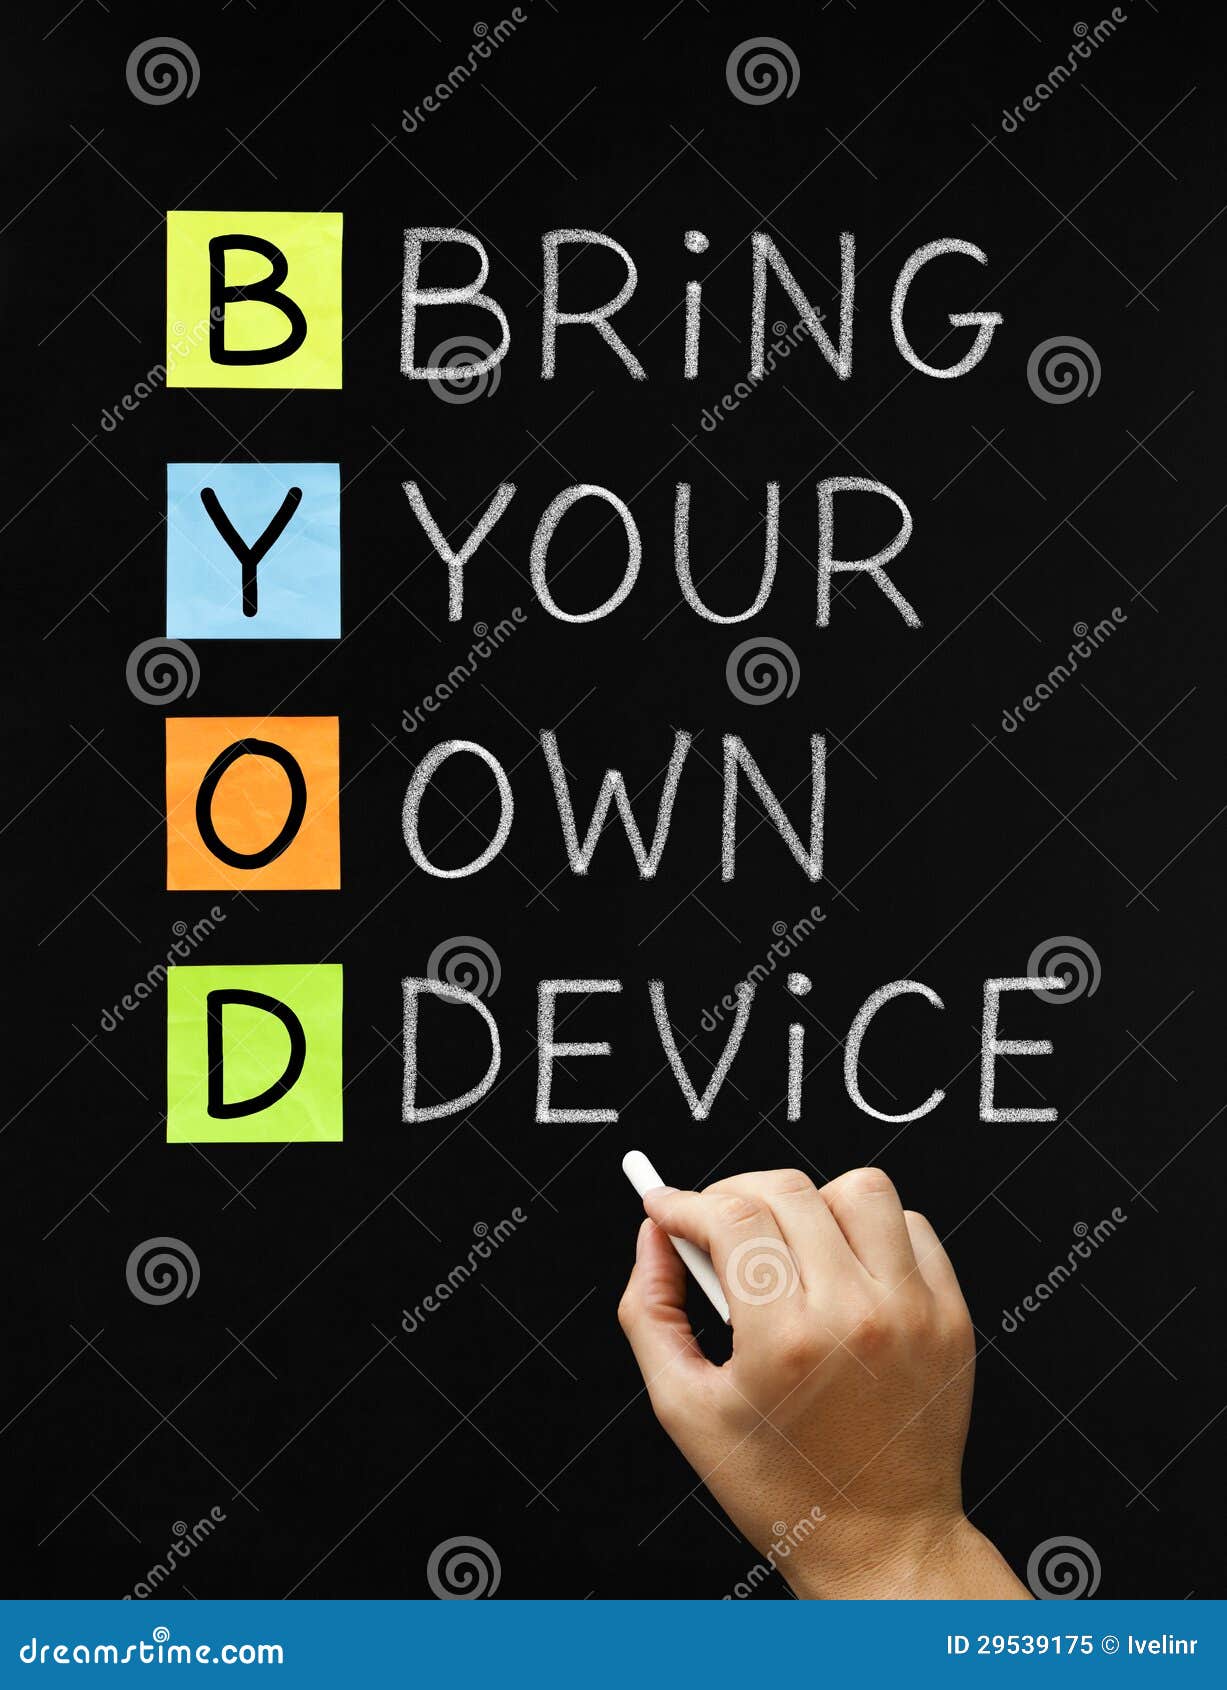 bring your own device